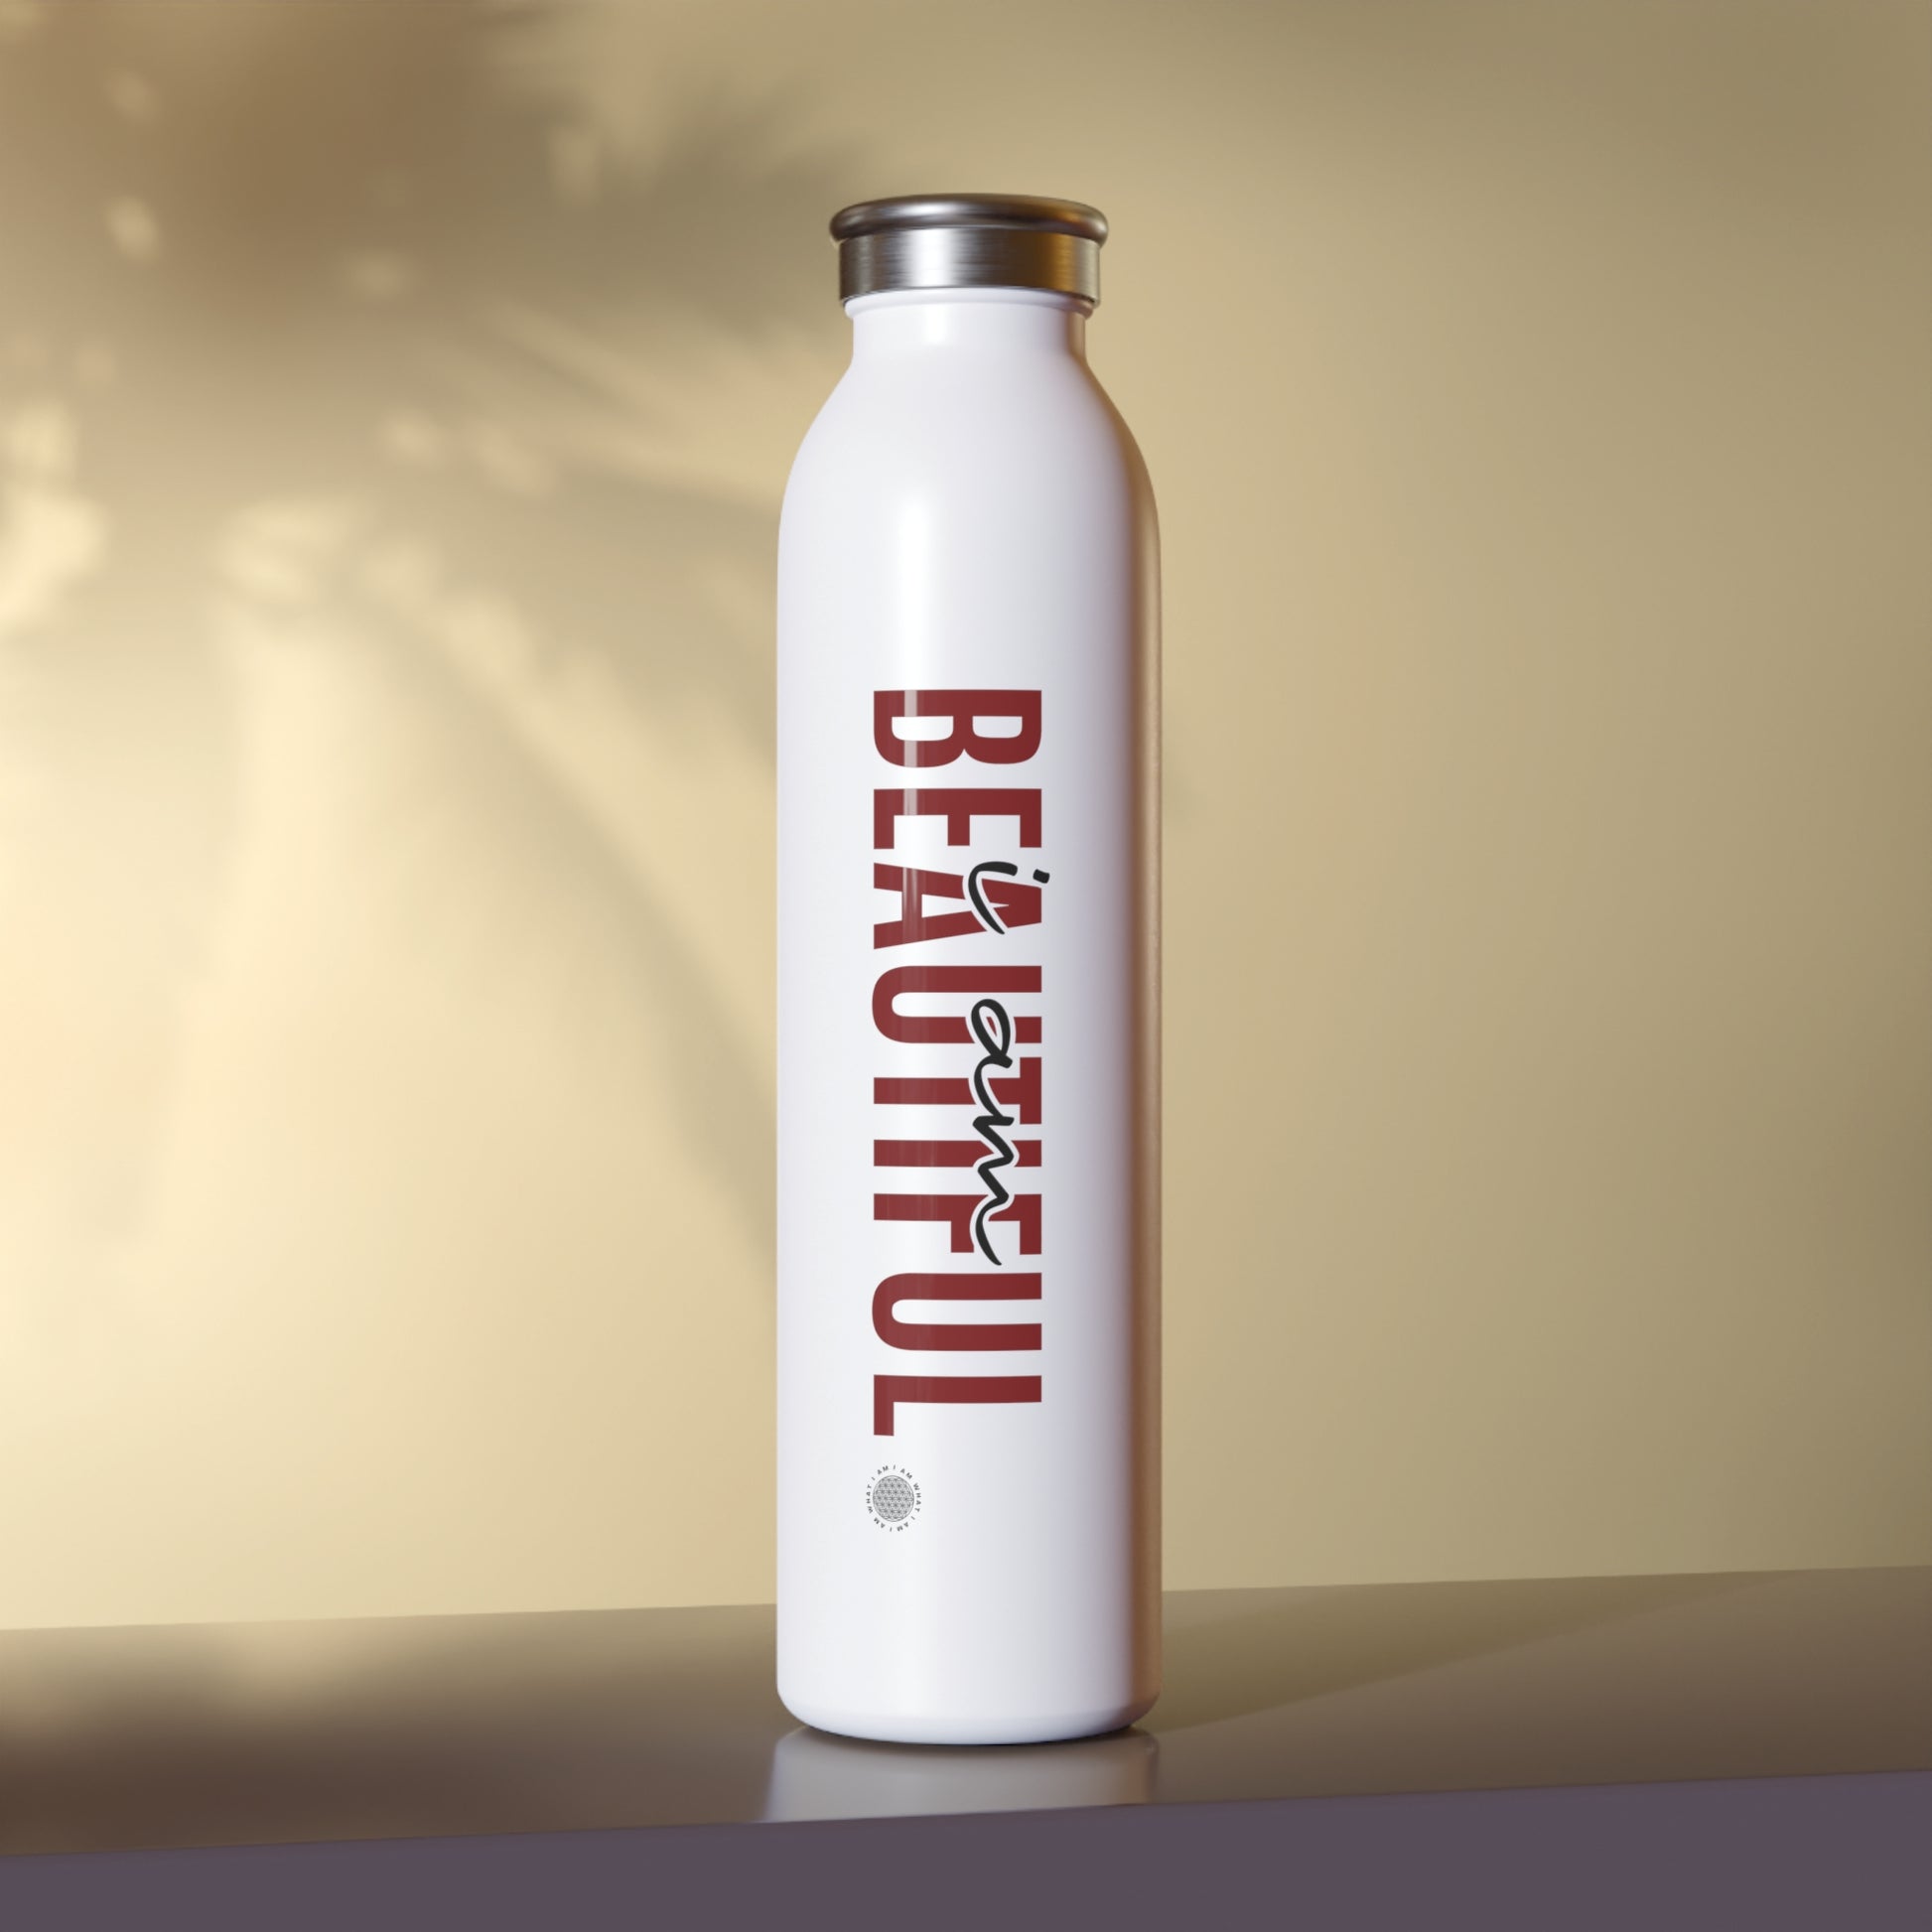 Our I Am Beautiful affirmation water bottle is one of our positive affirmations for mental health. Positive thinking keeps our mindset happy and healthy. This personalized water bottle was designed to become your favorite canvas of expression.